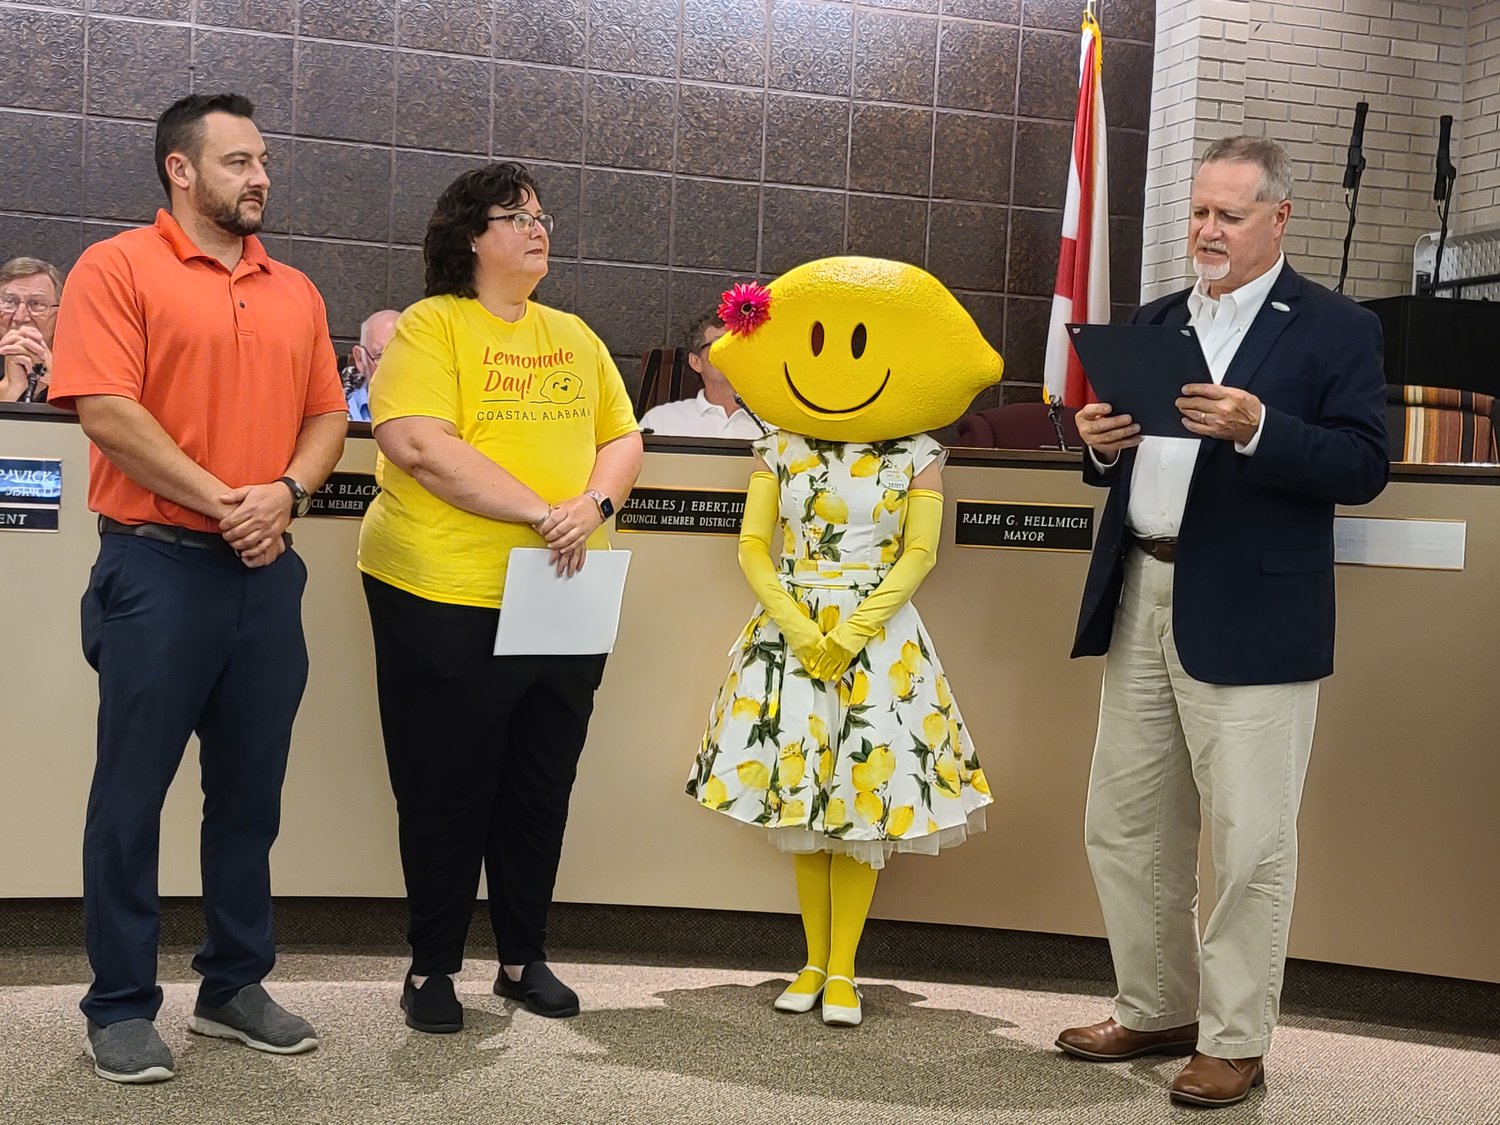 From left, South Baldwin Chamber Vice President of Investor Relations Travis Valentine, Coastal Alabama Business Chamber VP of Education & Programs Penny Hughey, Lemonade Day Mascot Zesty, and Foley Mayor Ralph Hellmich.